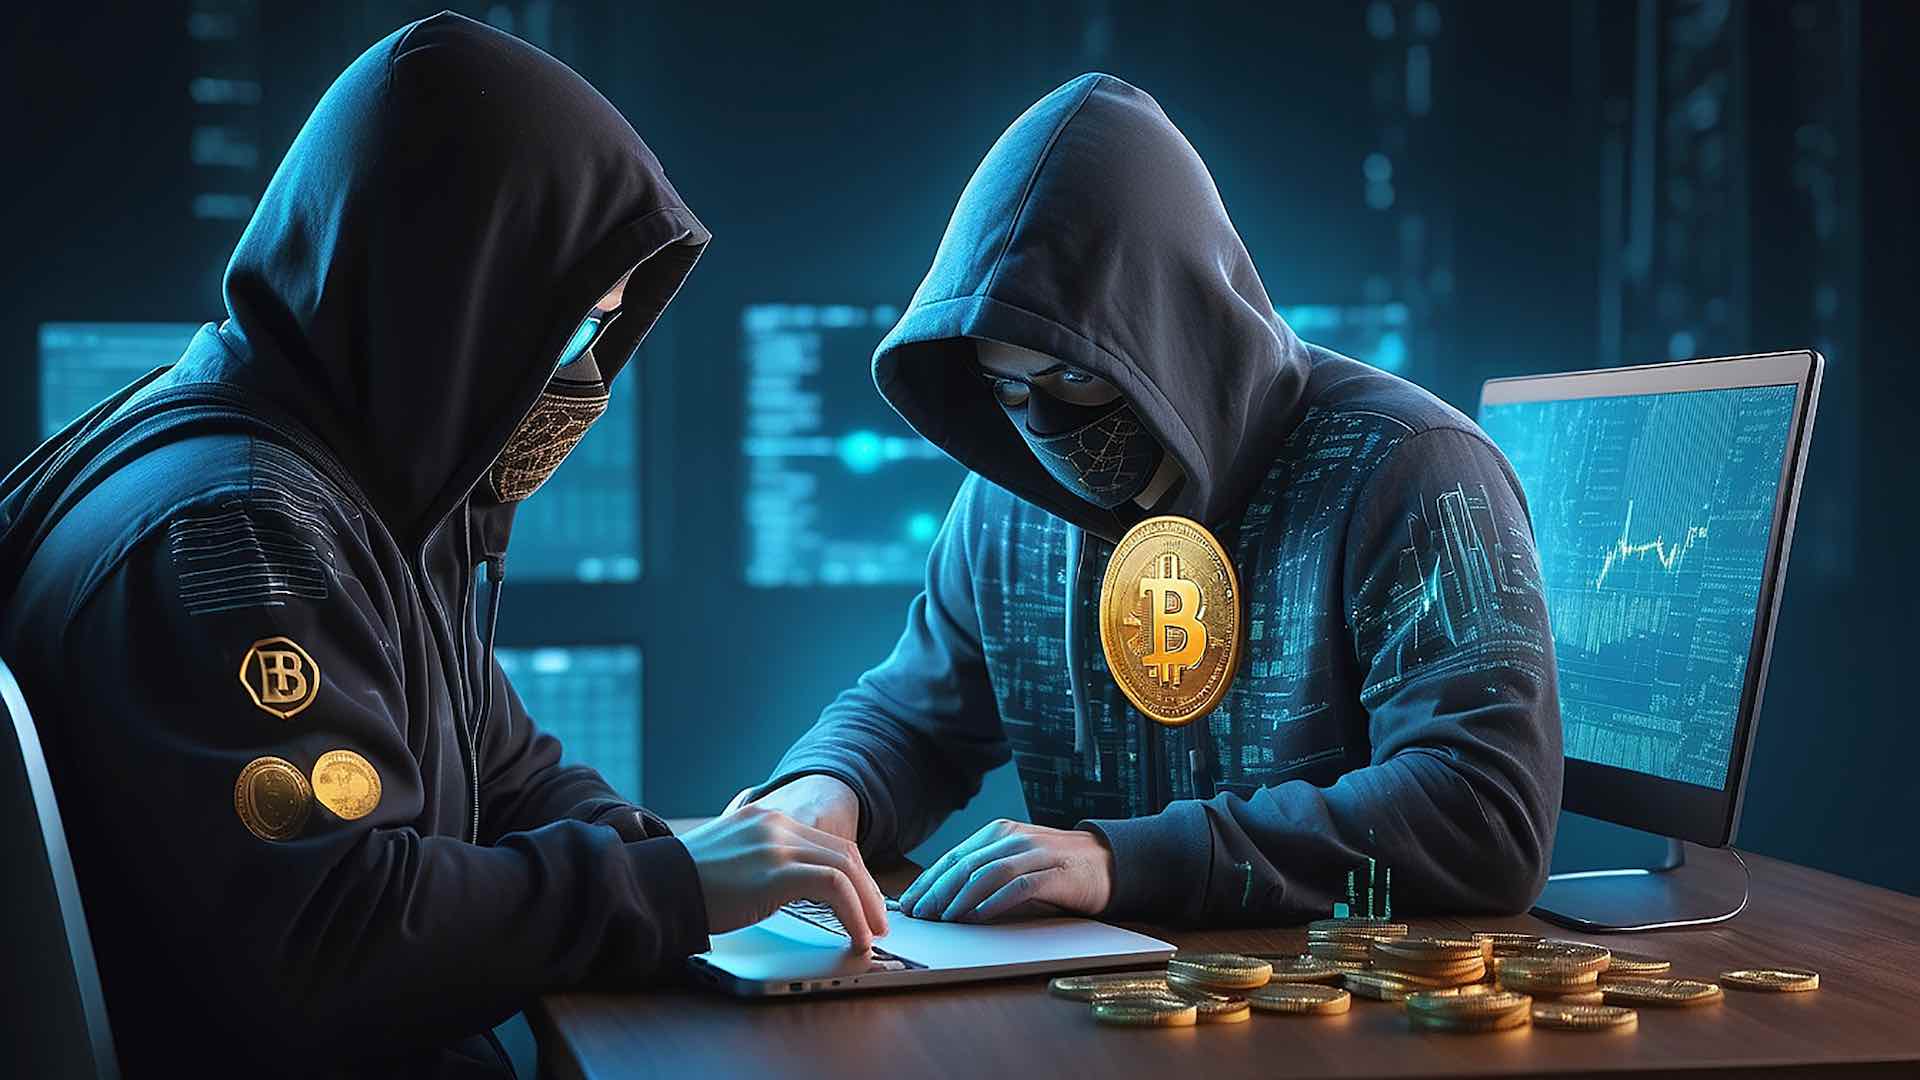 U.S. investment fraud surges 38% to $4.57B, crypto scams lead